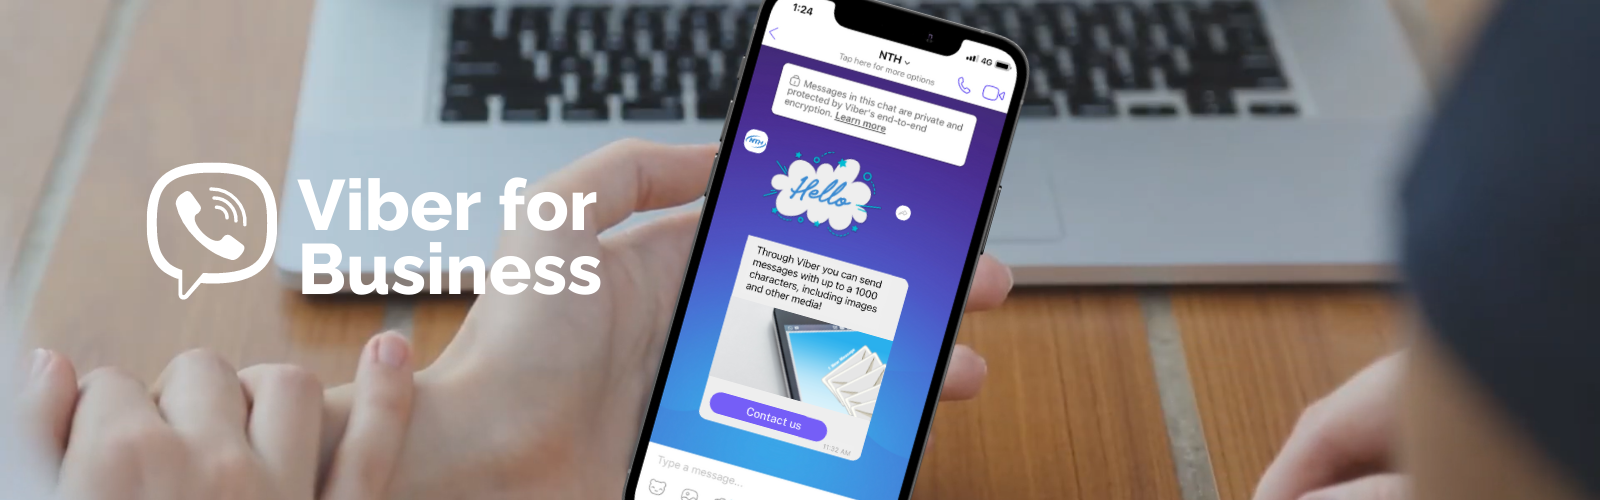 How to Use Viber For Business